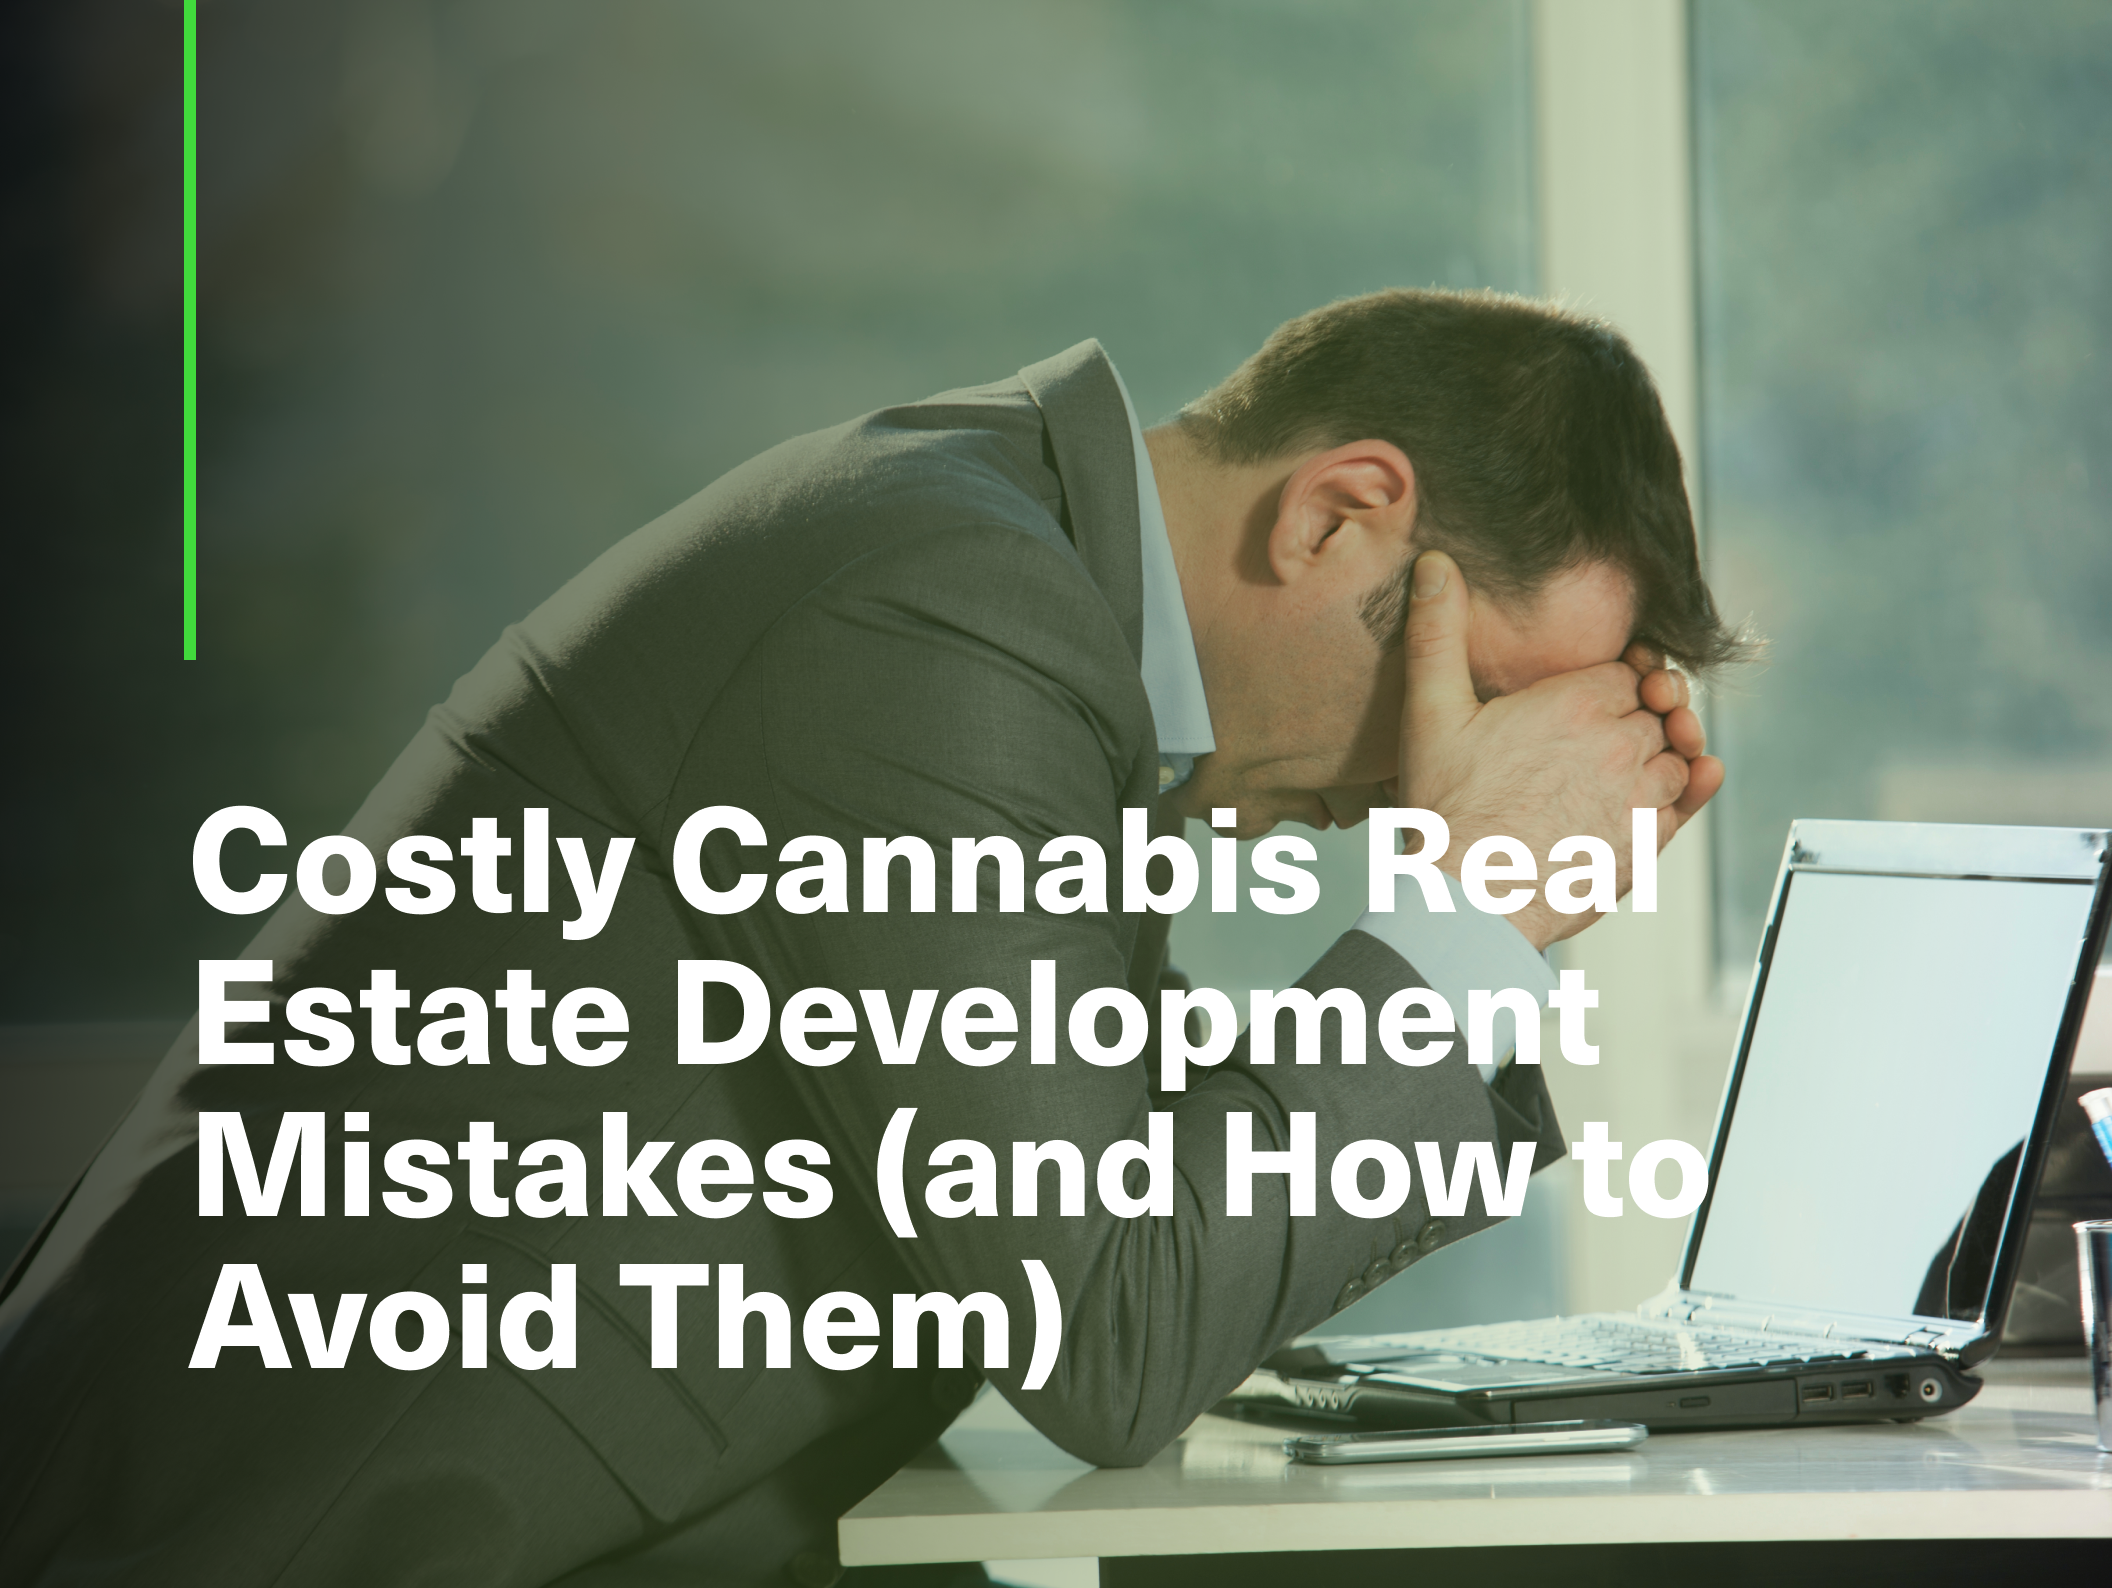 Costly Cannabis Real Estate Development Mistakes